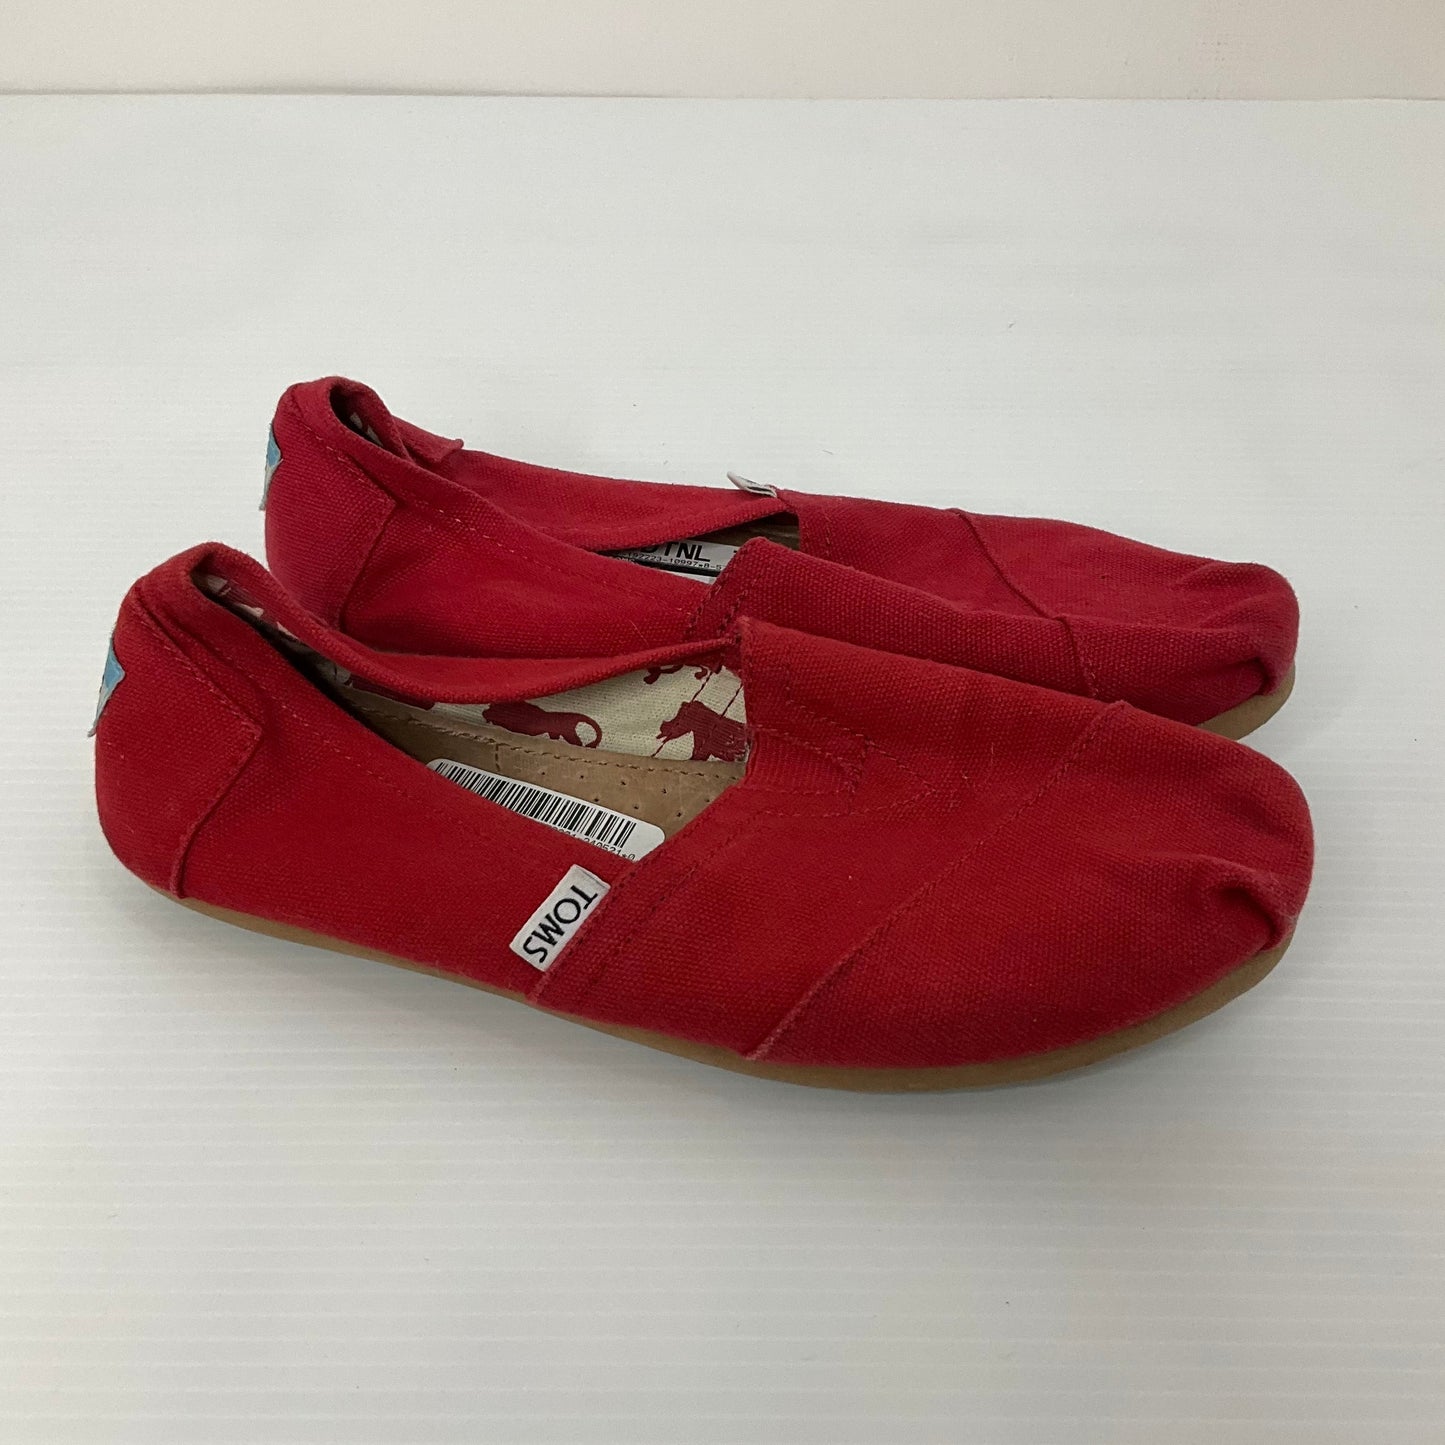 Red Shoes Flats Toms, Size 7